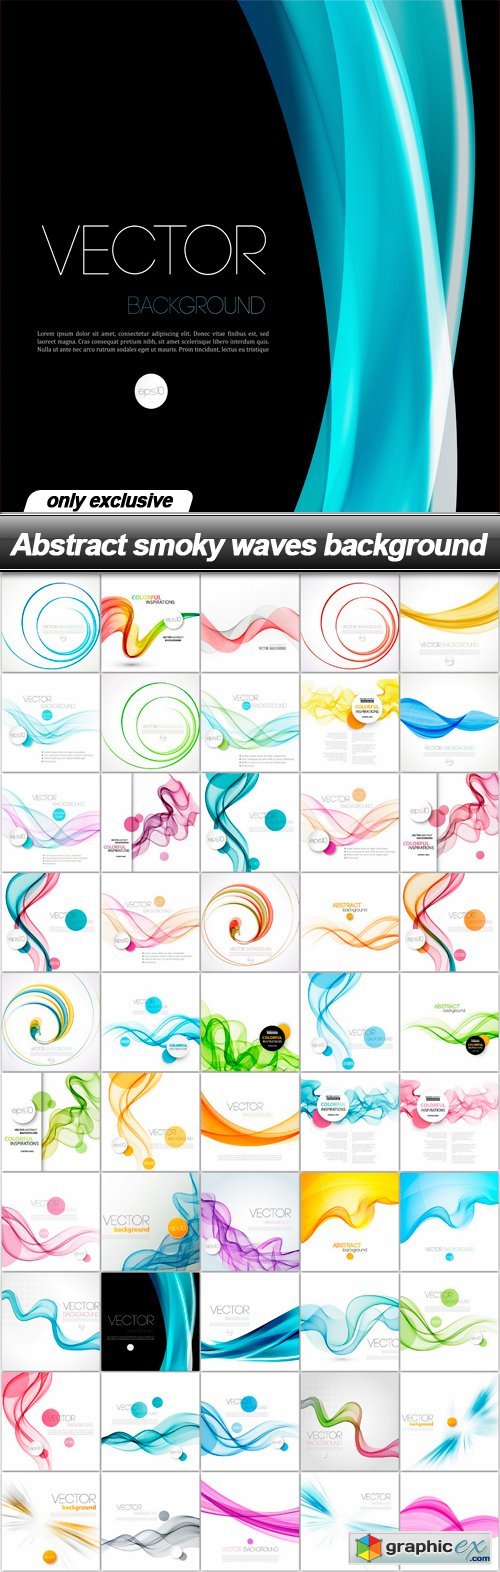 Abstract smoky waves background - 50 EPS